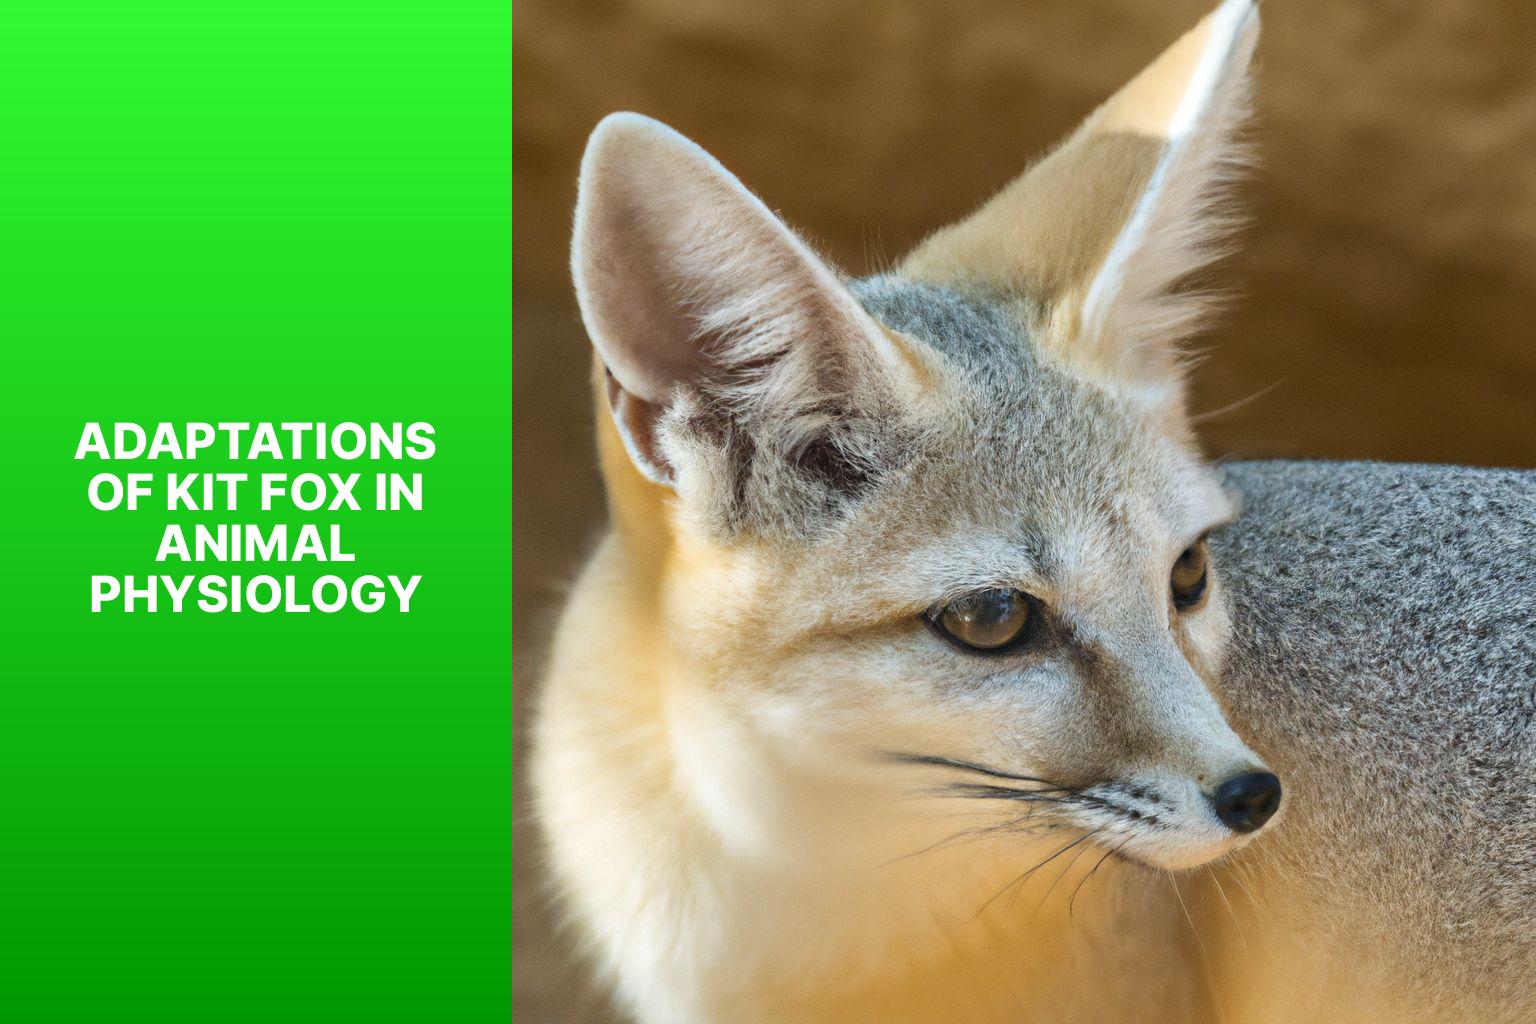 Adaptations of Kit Fox in Animal Physiology - Kit Fox in Animal Physiology 